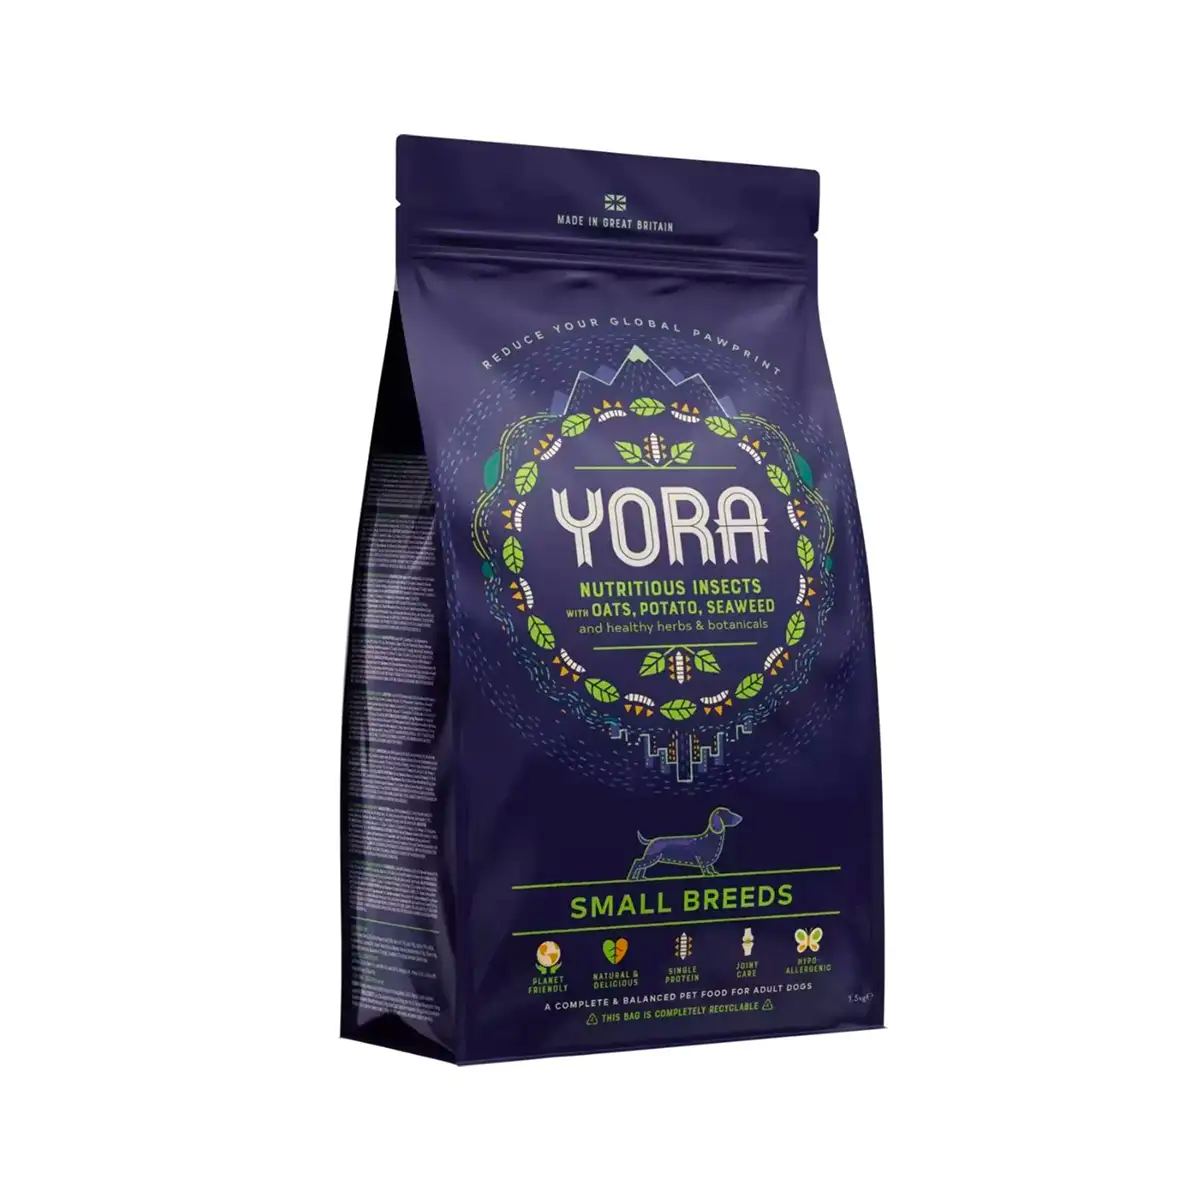 Yora - Complete Insect Based Adult Small Breed Dog Food